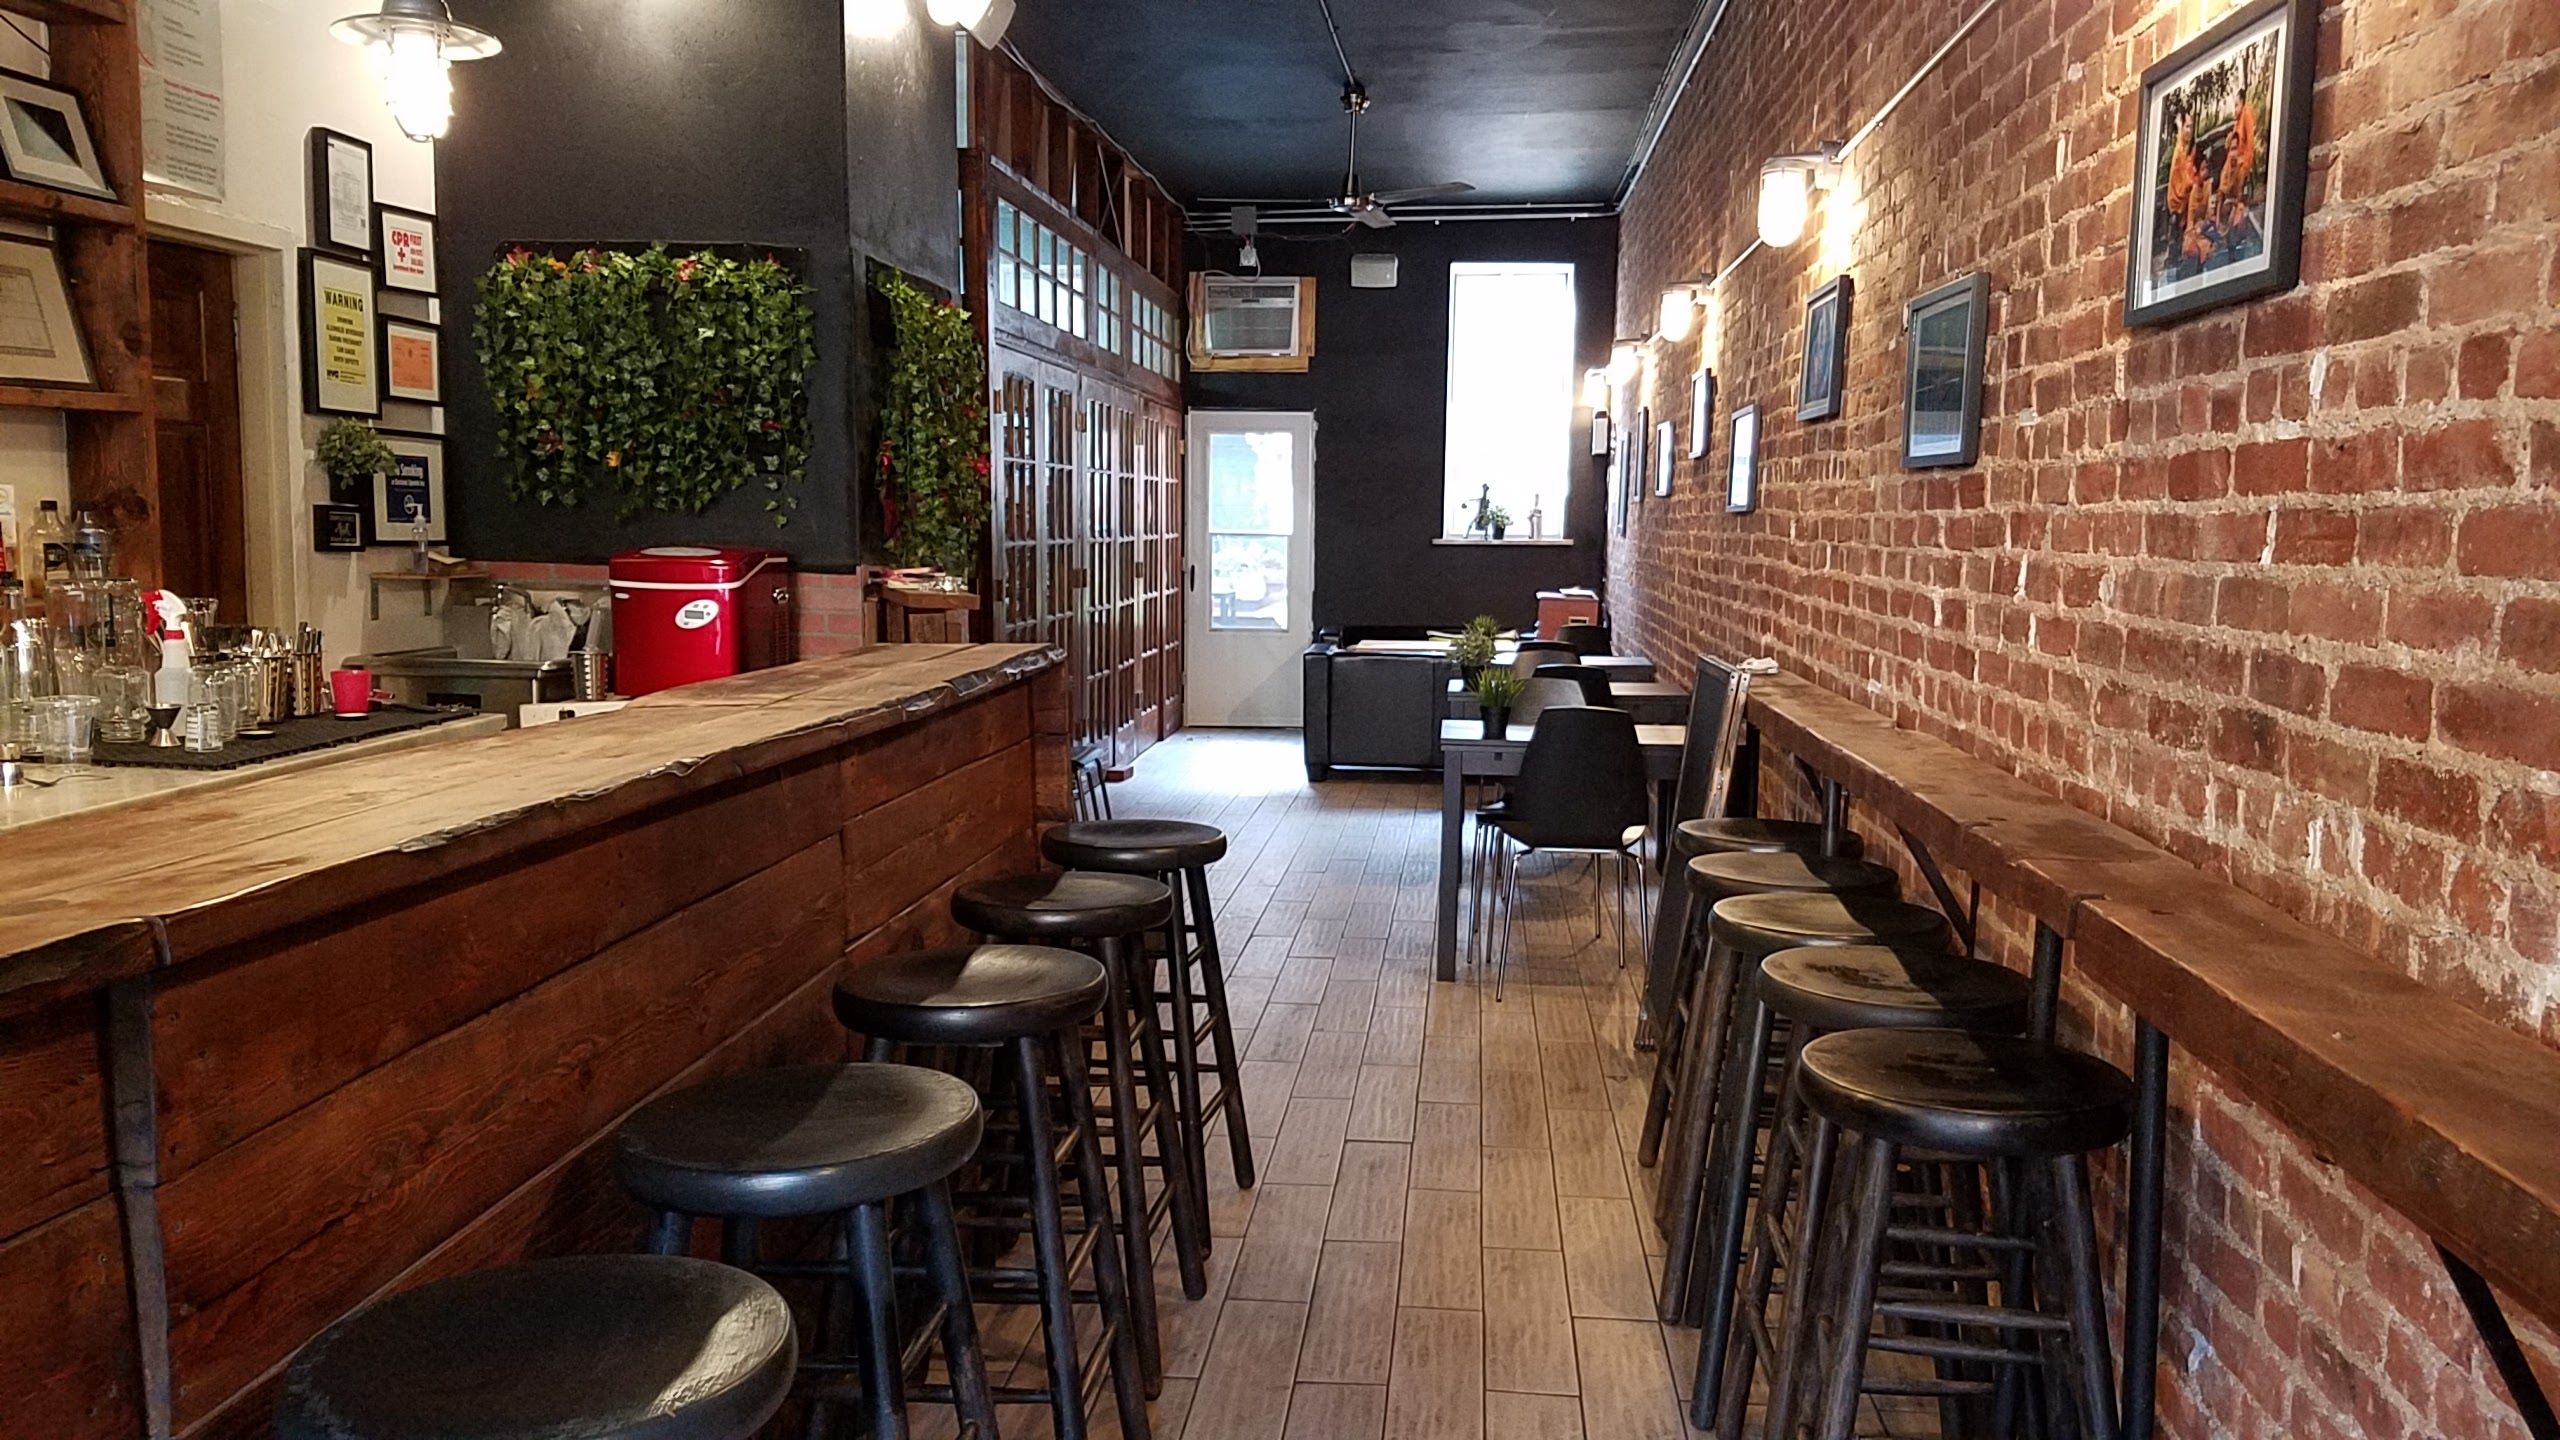 The taproom of Island to Island Juicery Brewery serving House of Juice and Brooklyn Jun Brew